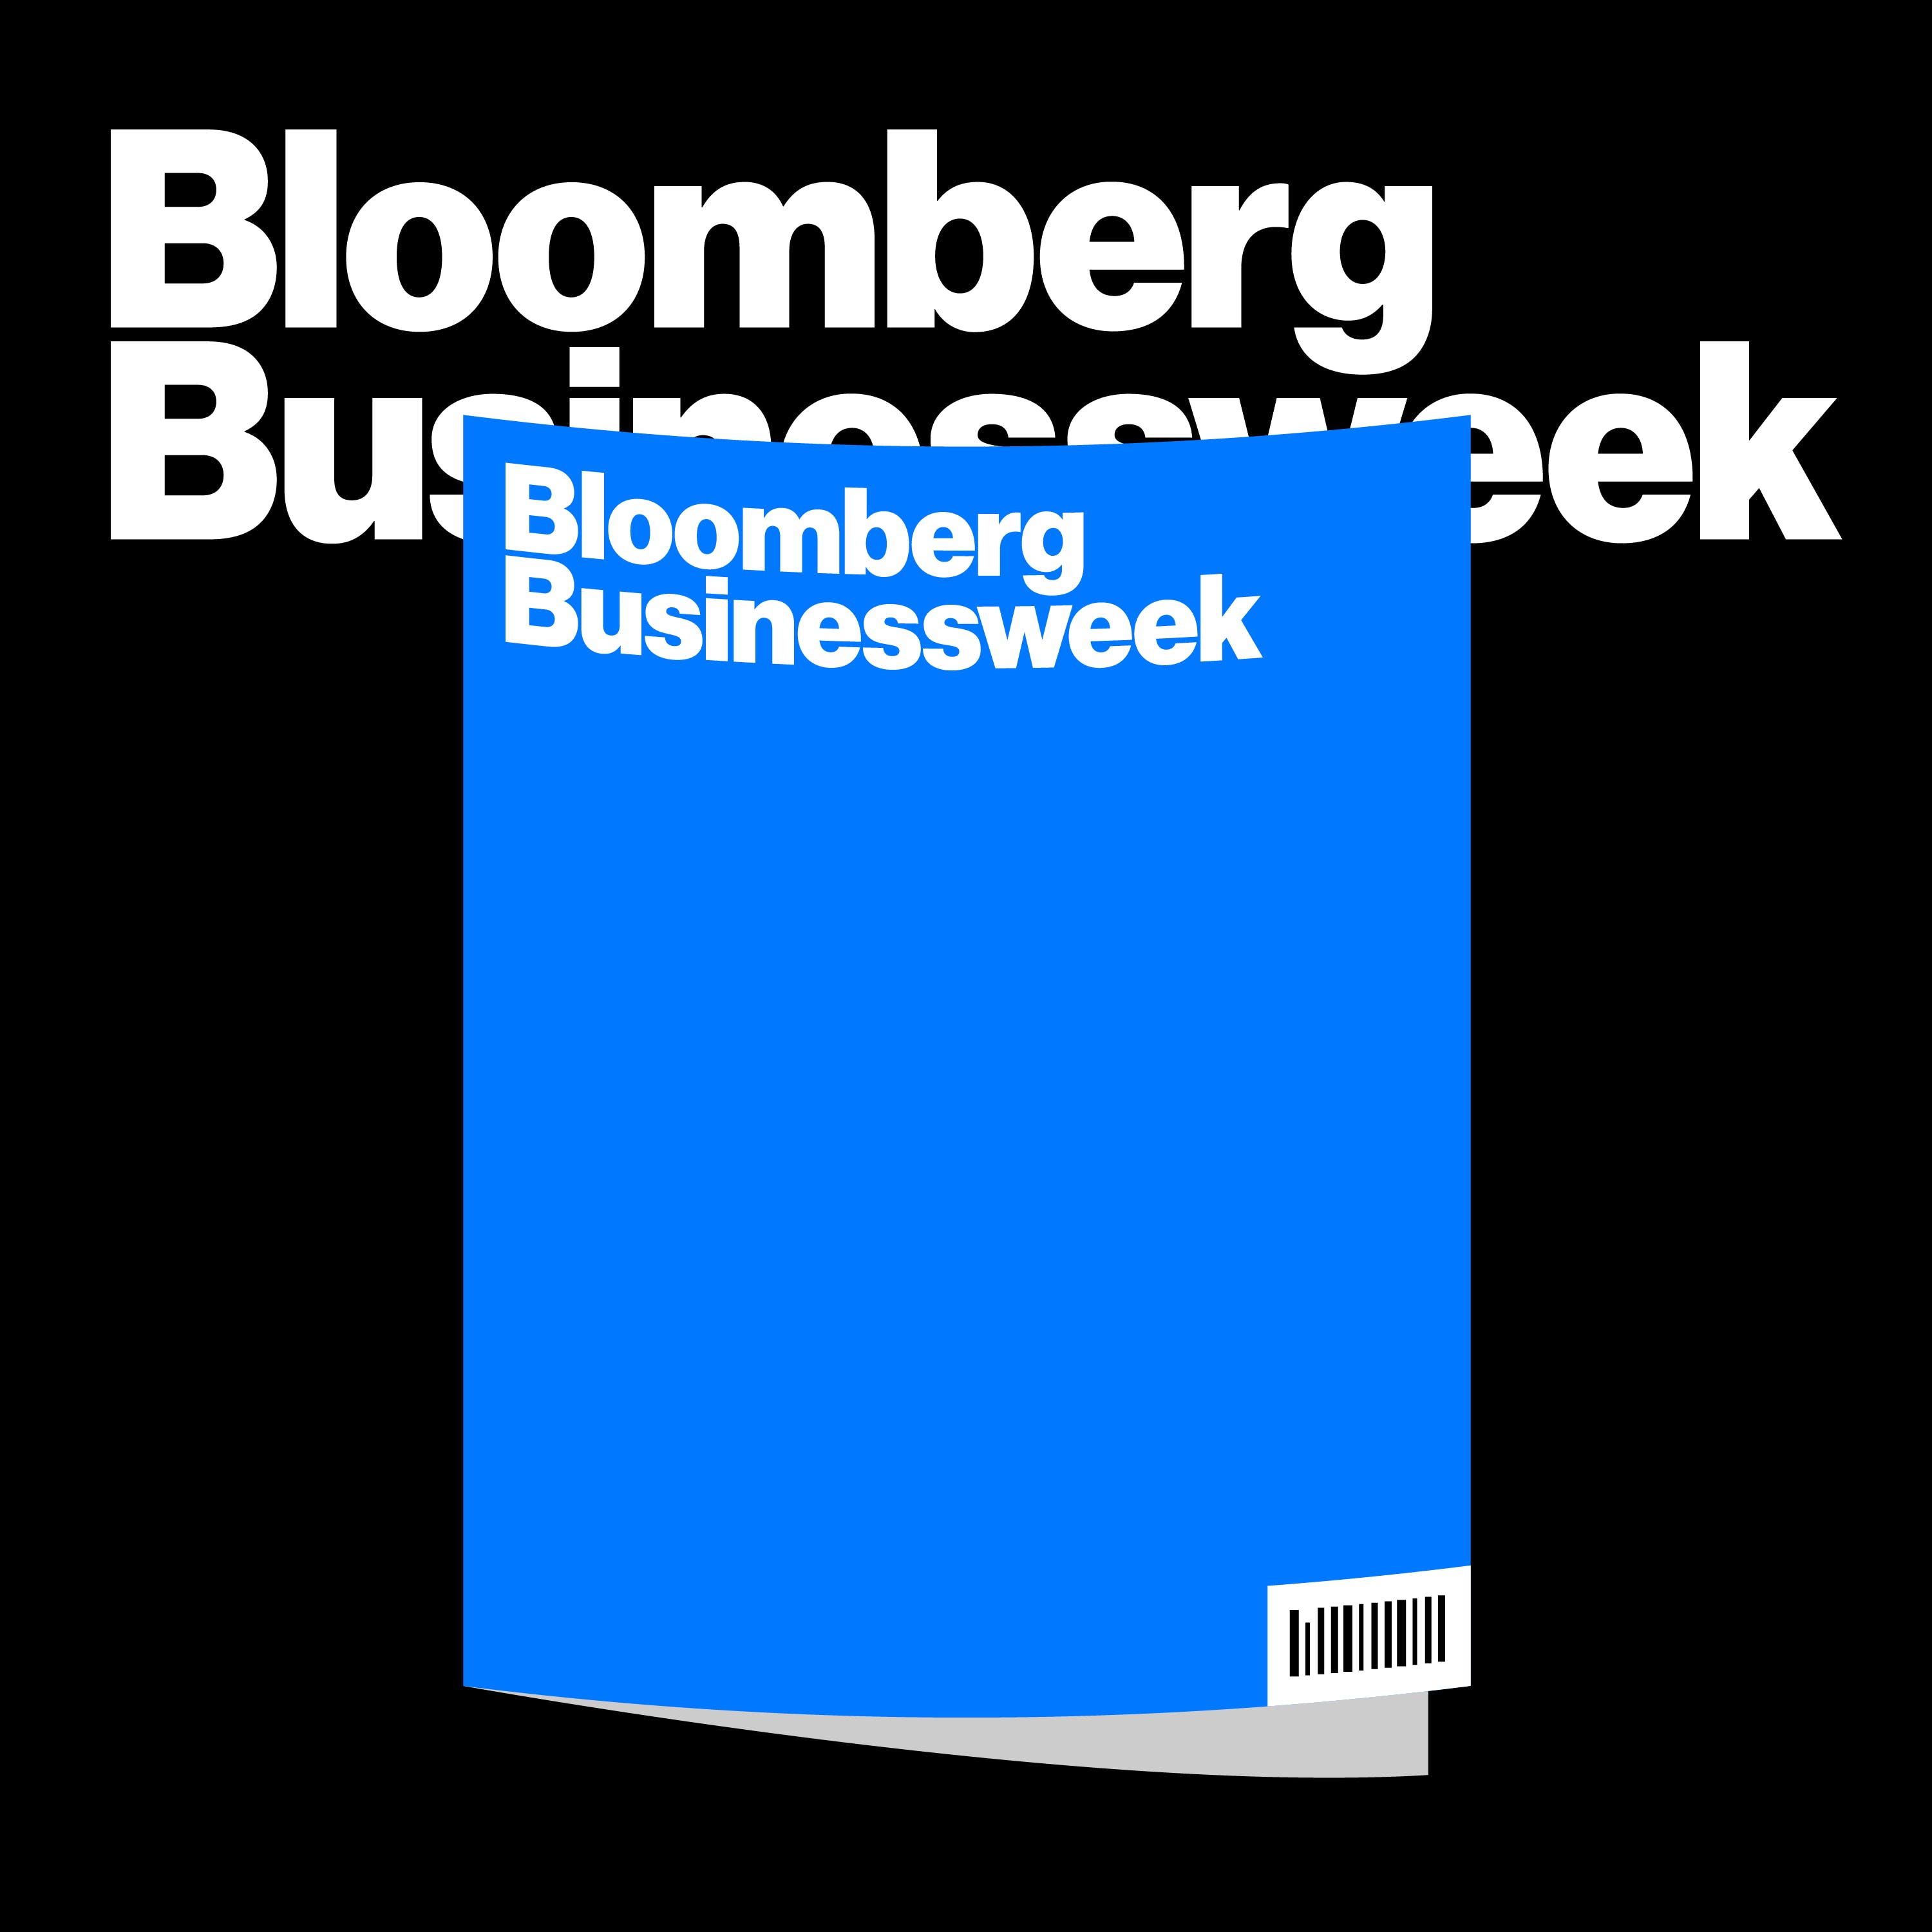 Bloomberg Markets: Flickinger Says Amazon Move `Defensive'